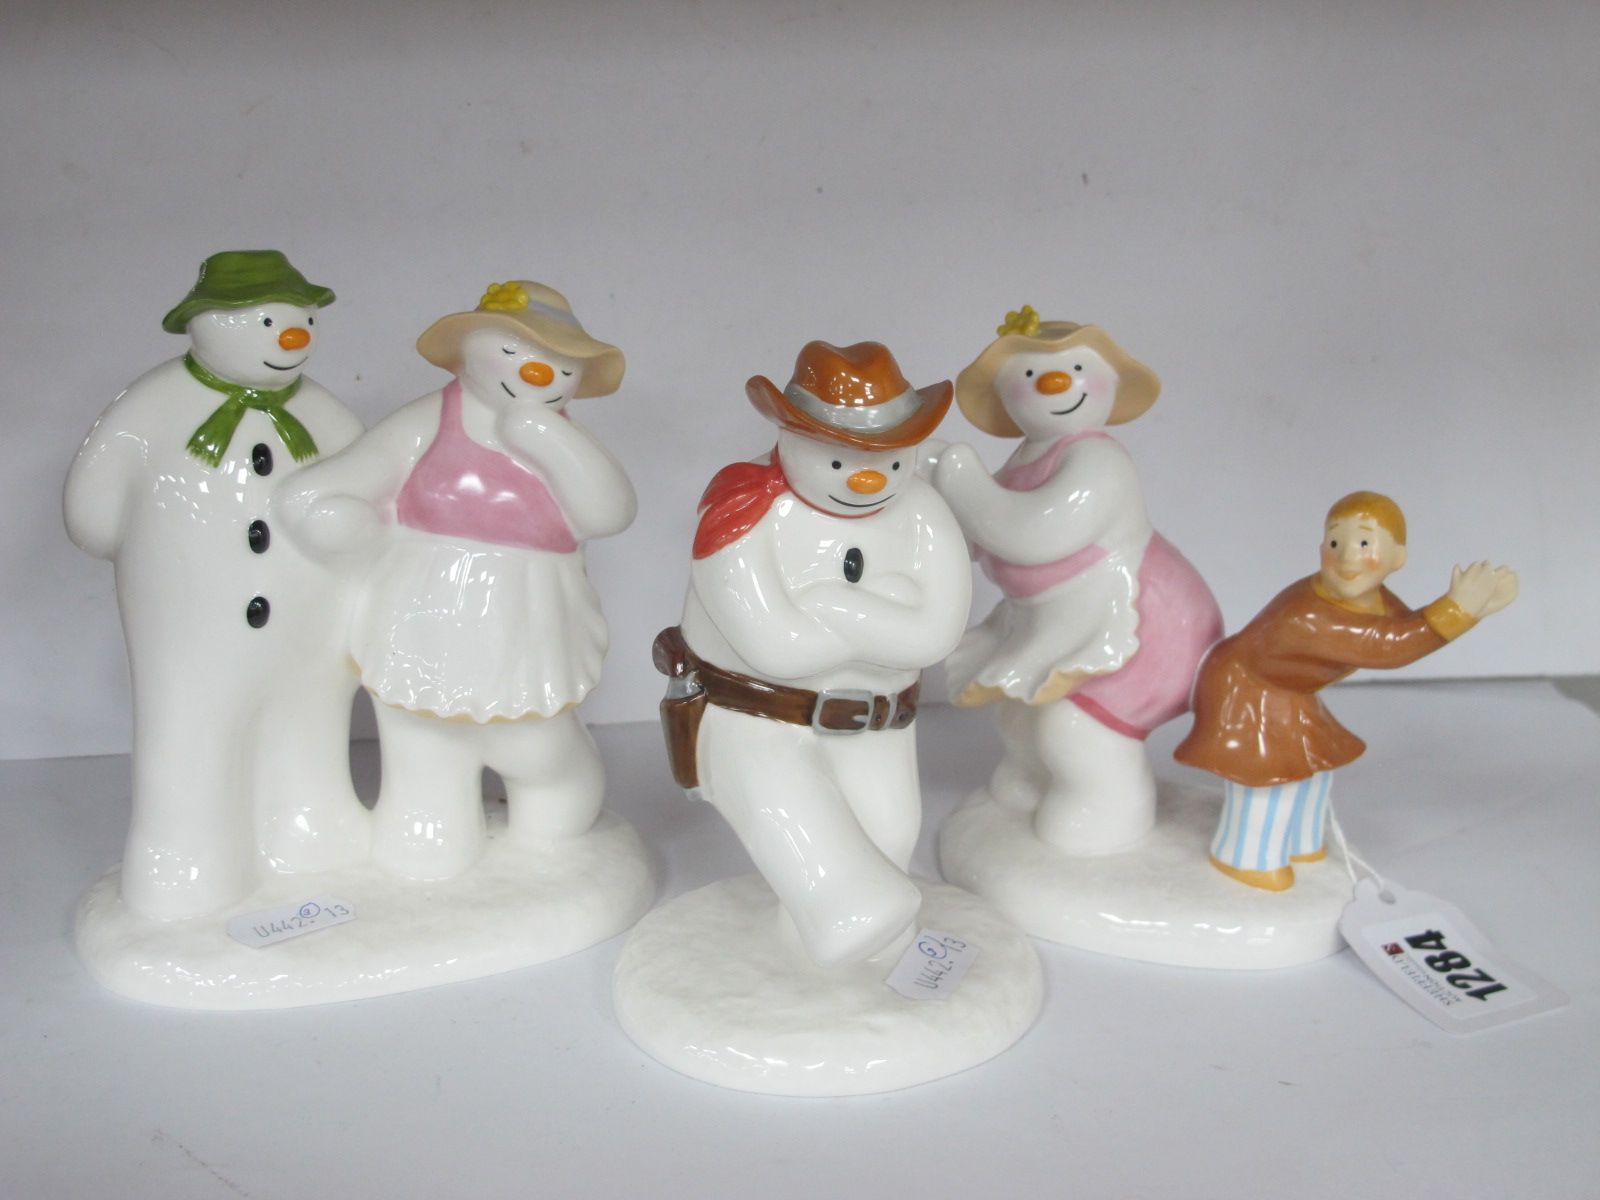 Coalport The Snowman Character Figures, 'Dance The Night Away', 'The Bashful Blush' and 'Cowboy